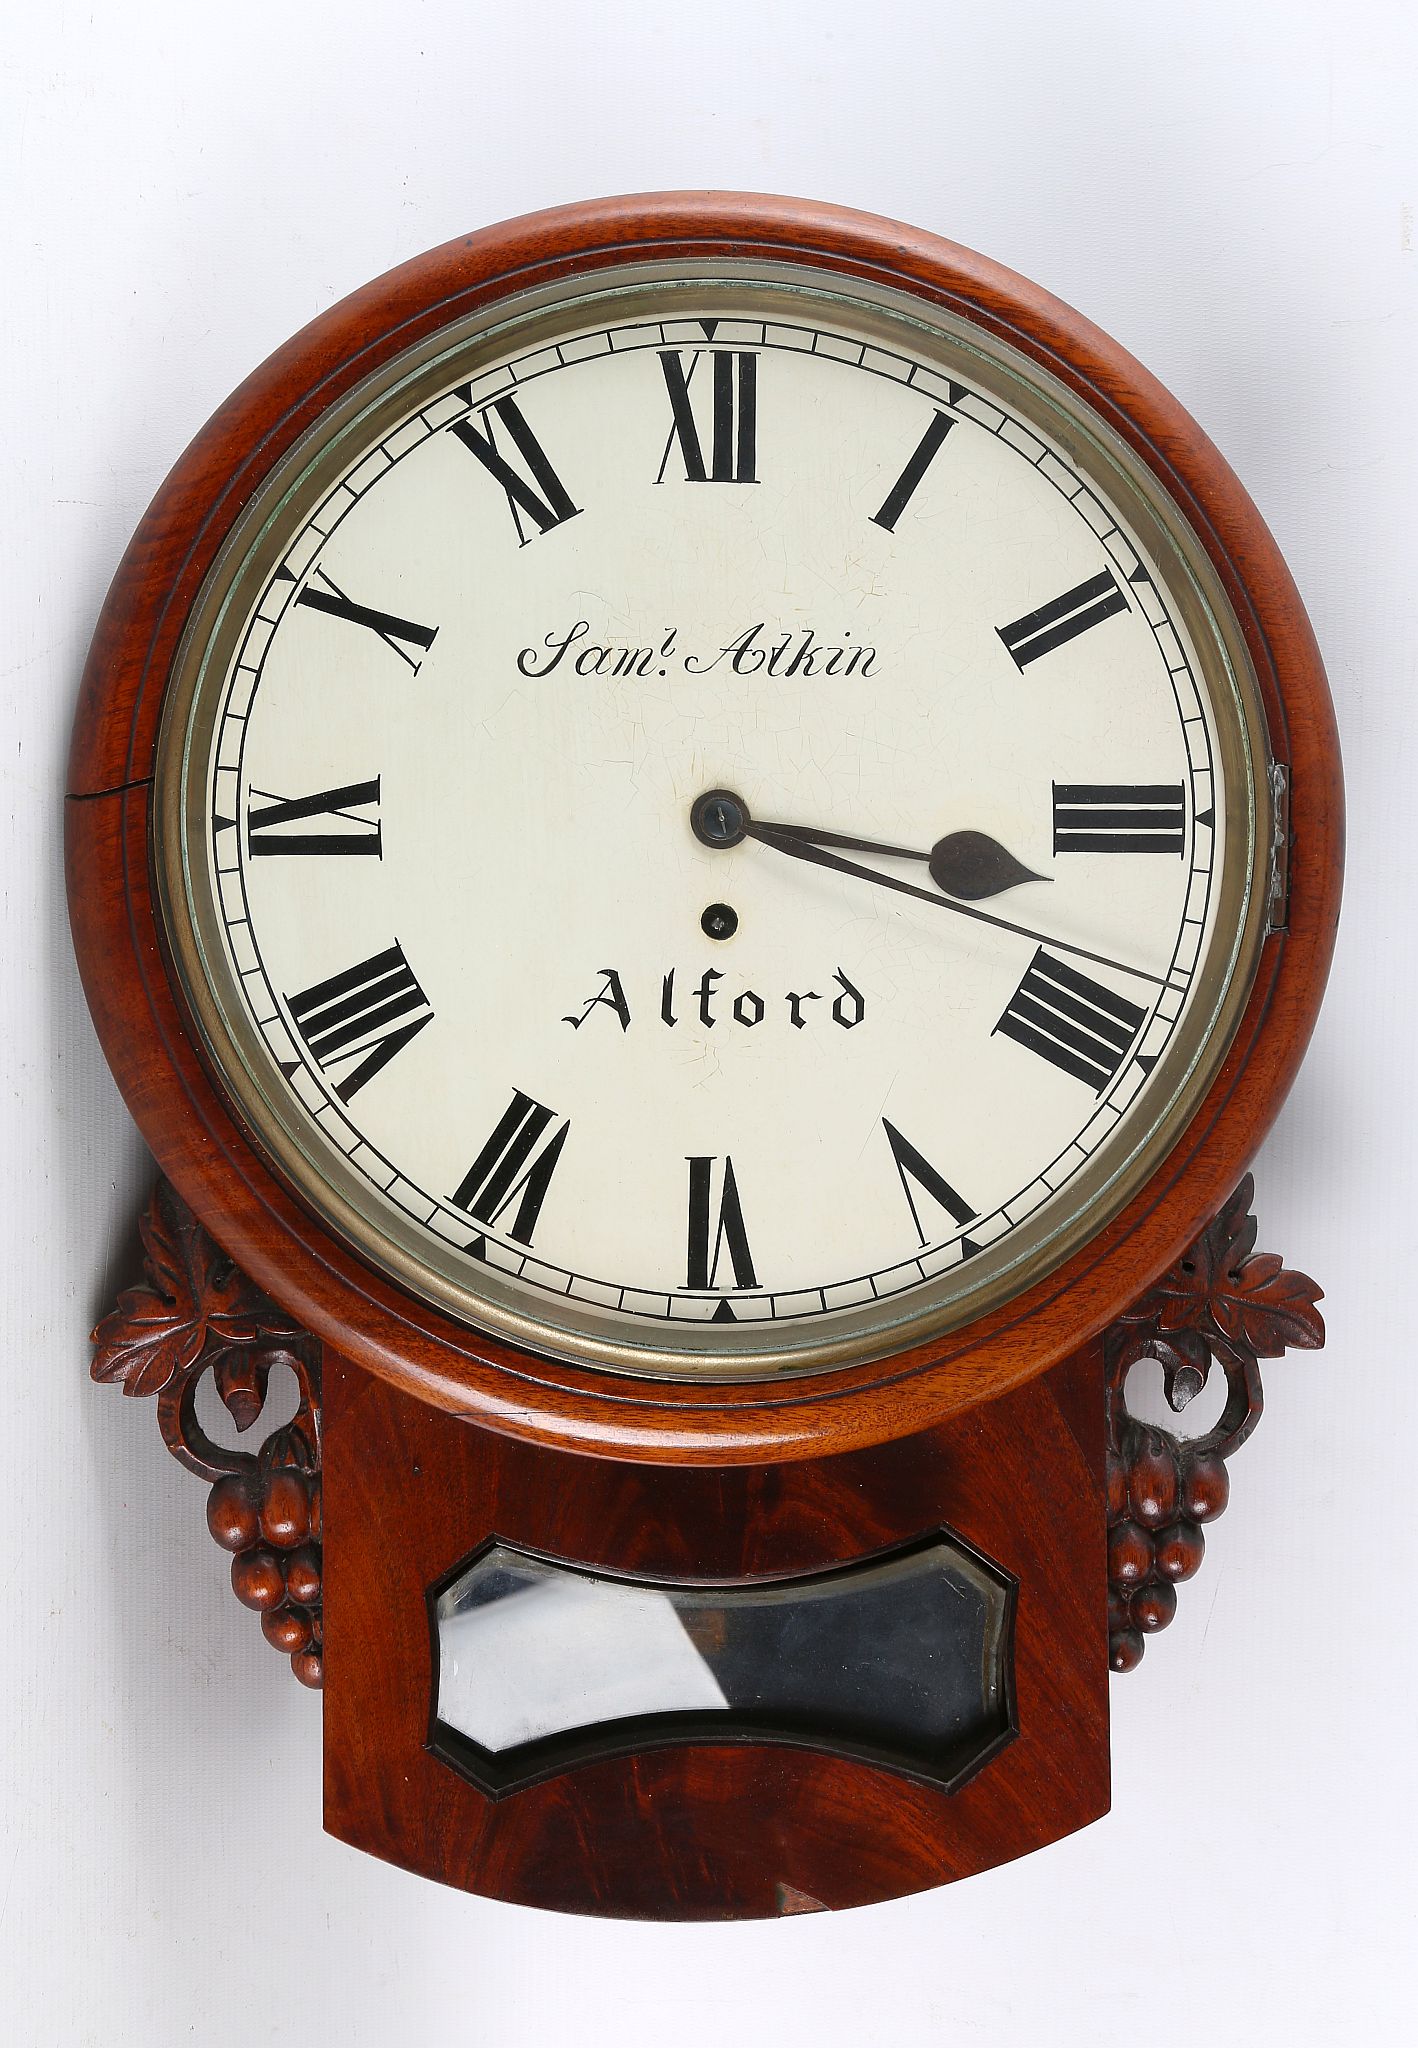 Victorian mahogany drop dial wall timepiece marked "Samuel Atkin, Alford", the single fusee movement